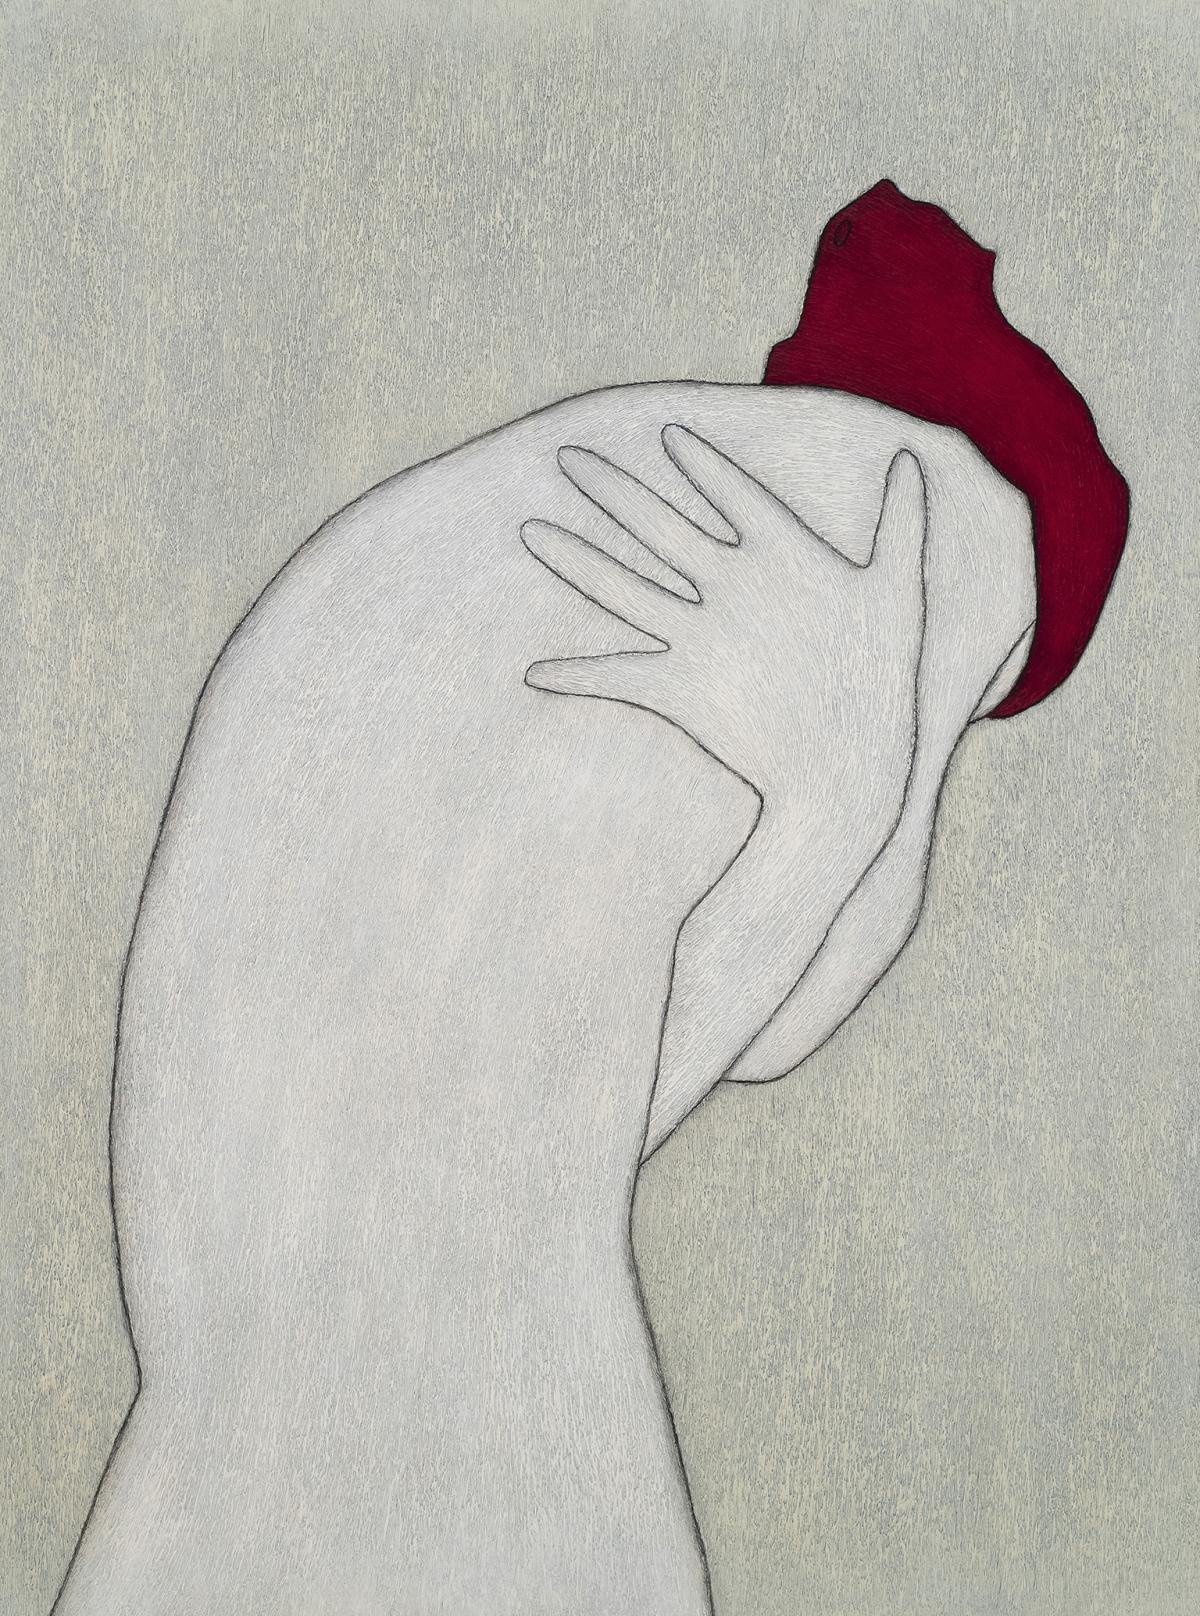 Painting of a back of a figure with arms wrapped around their body